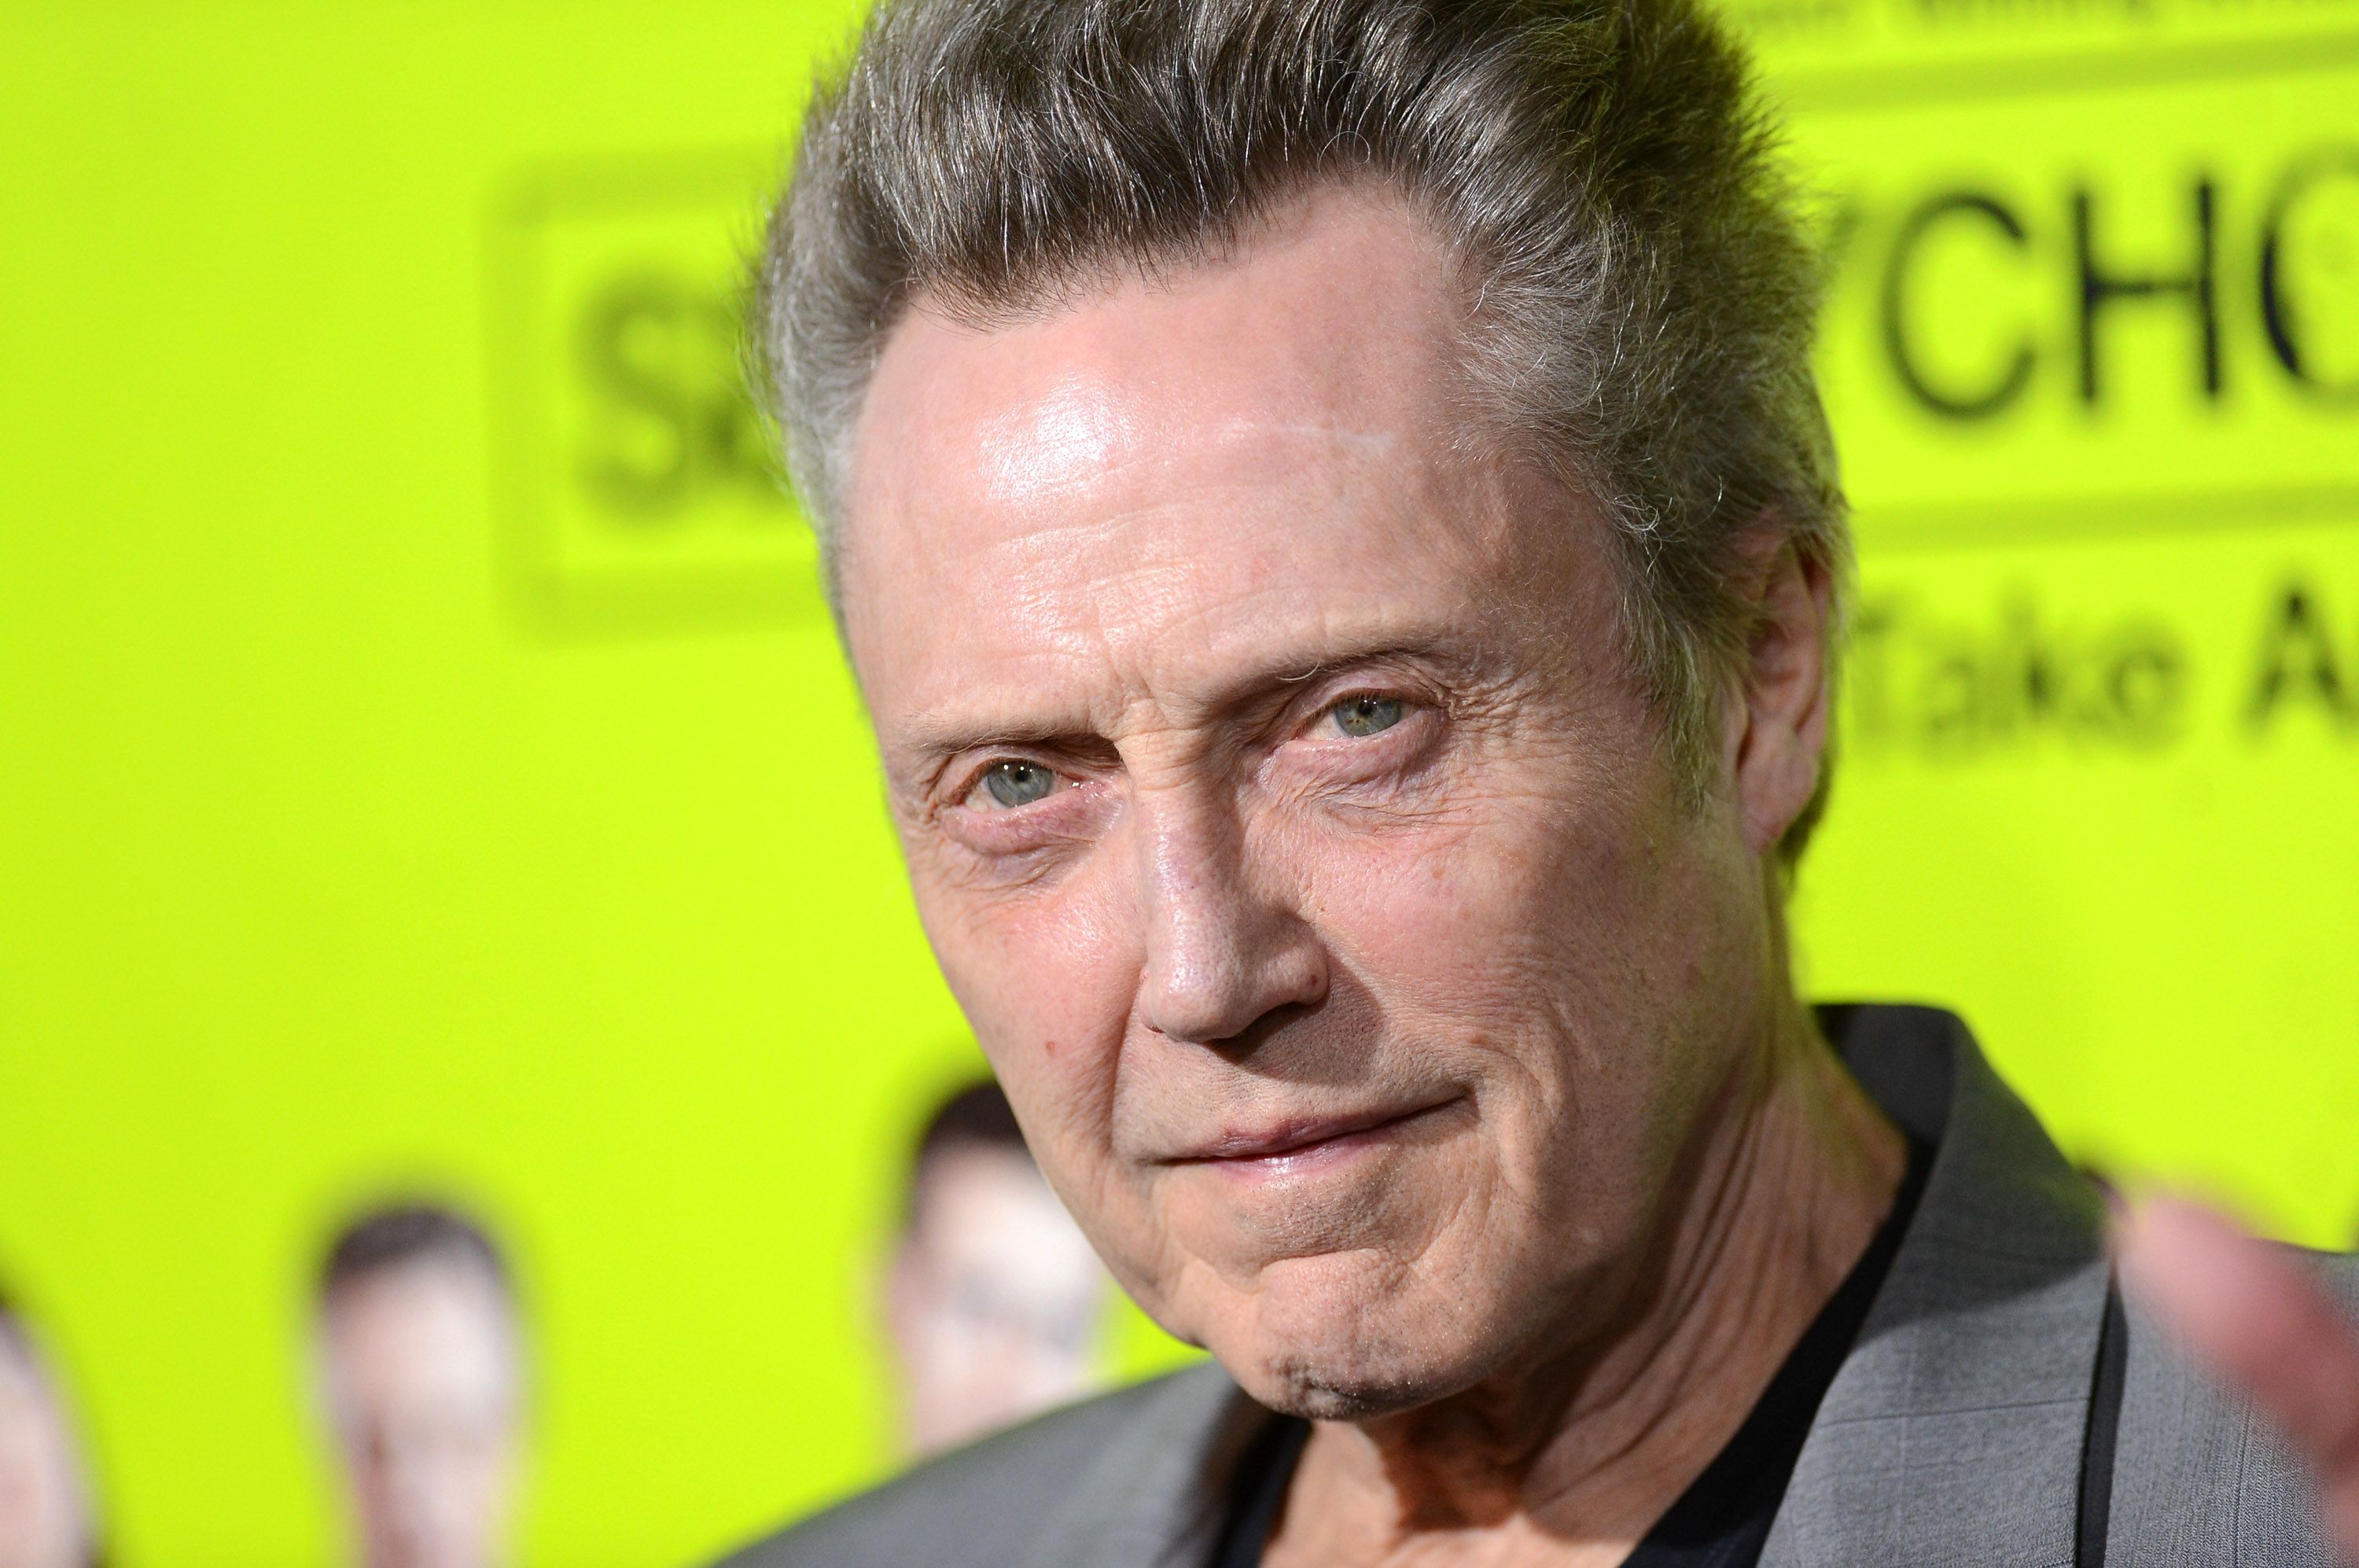 Christopher Walken at the premiere of "Seven Psychopaths" on October 1, 2012, in Westwood, California. | Source: Getty Images